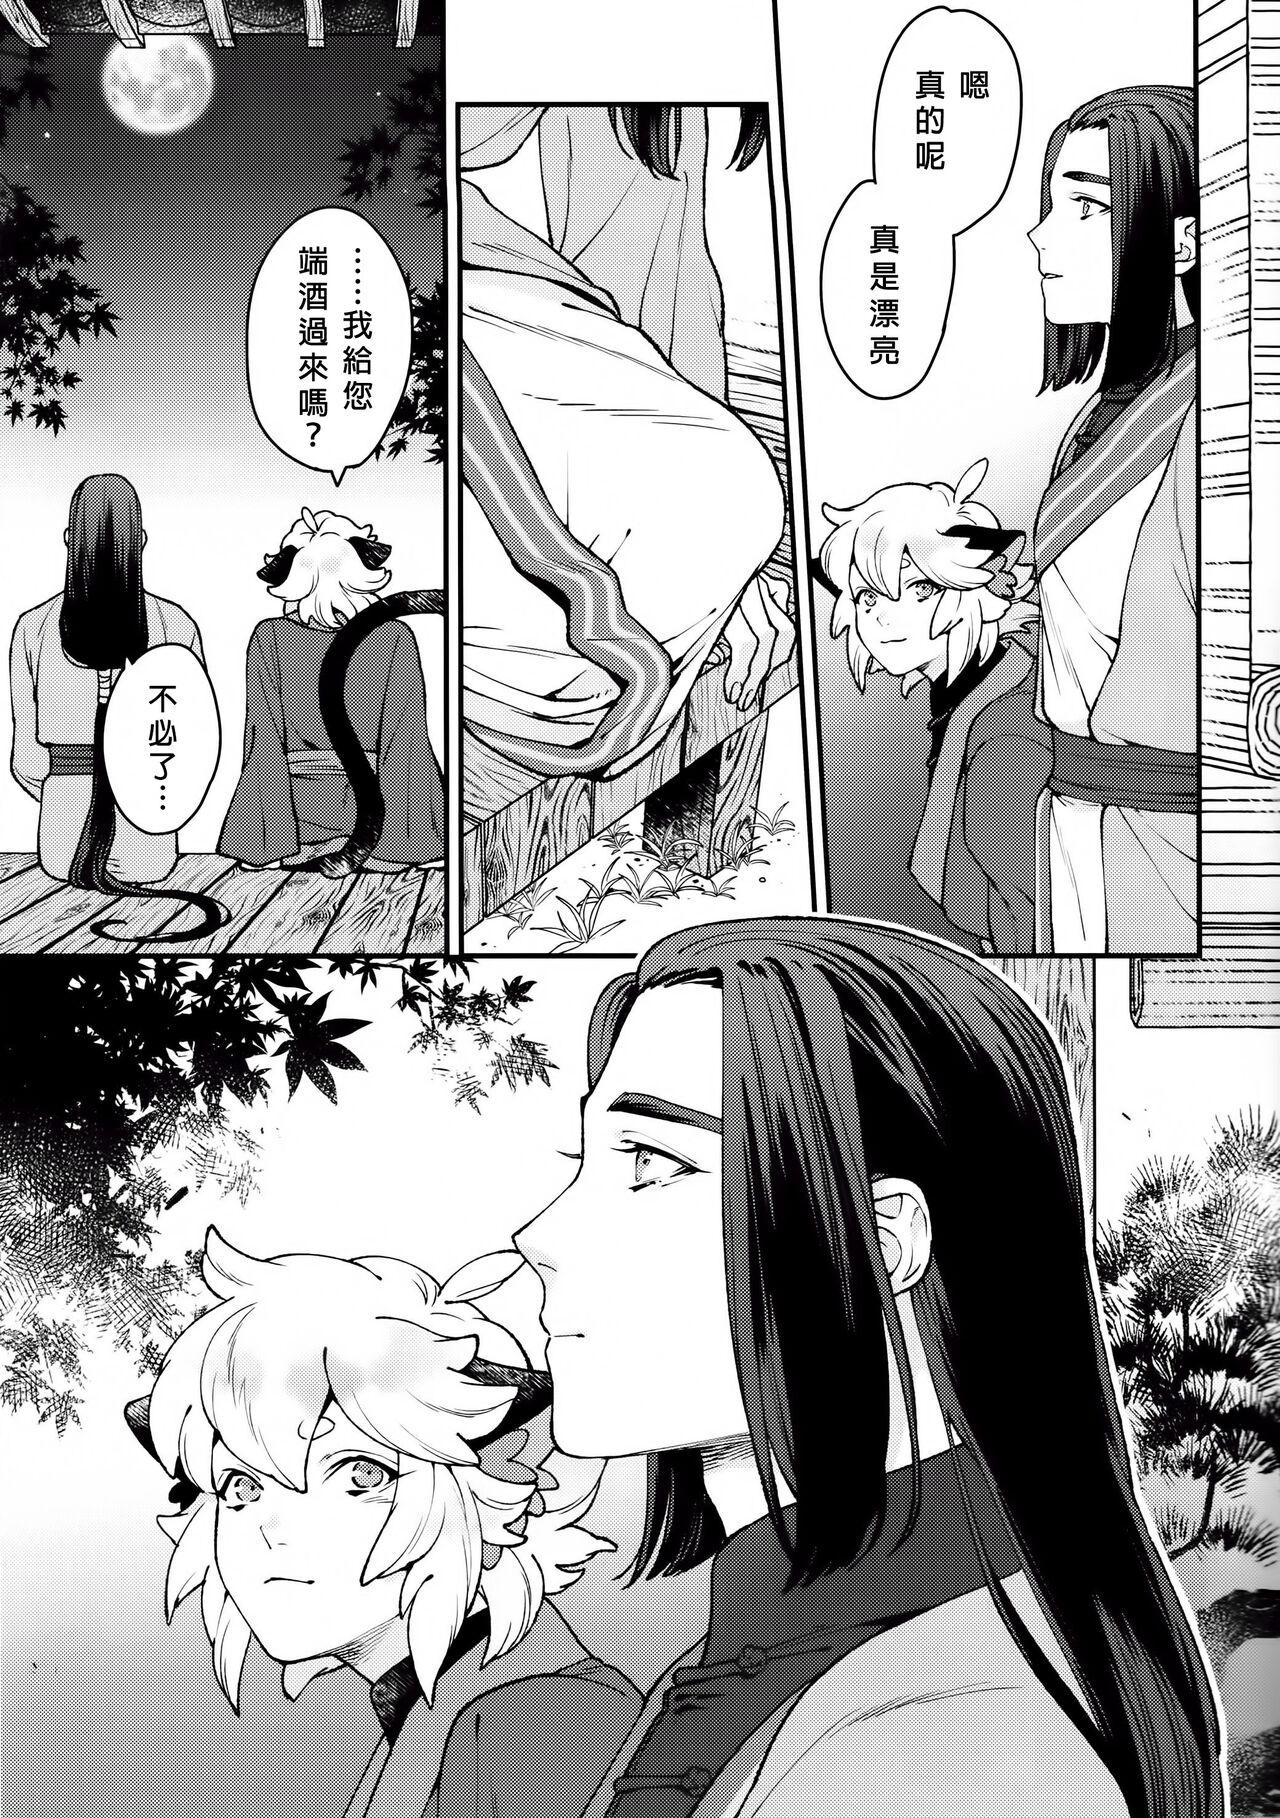 Puto When the Hoar-frost falls|霜降之时 - The legend of luo xiaohei Hardcore Rough Sex - Page 4